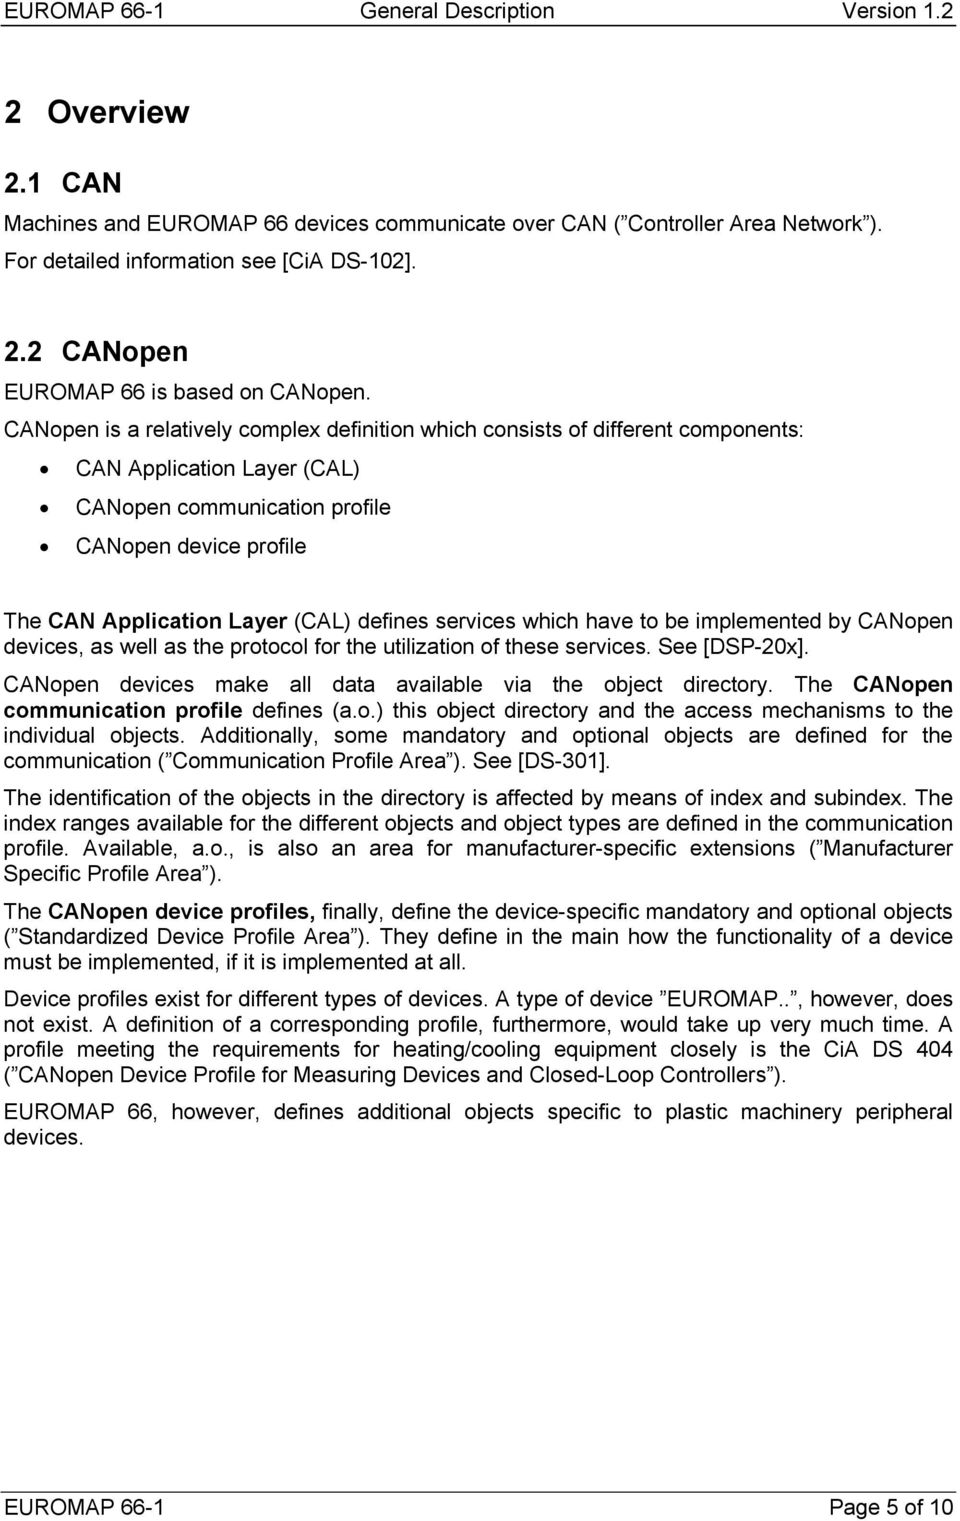 defines services which have to be implemented by CANopen devices, as well as the protocol for the utilization of these services. See [DSP-20x].